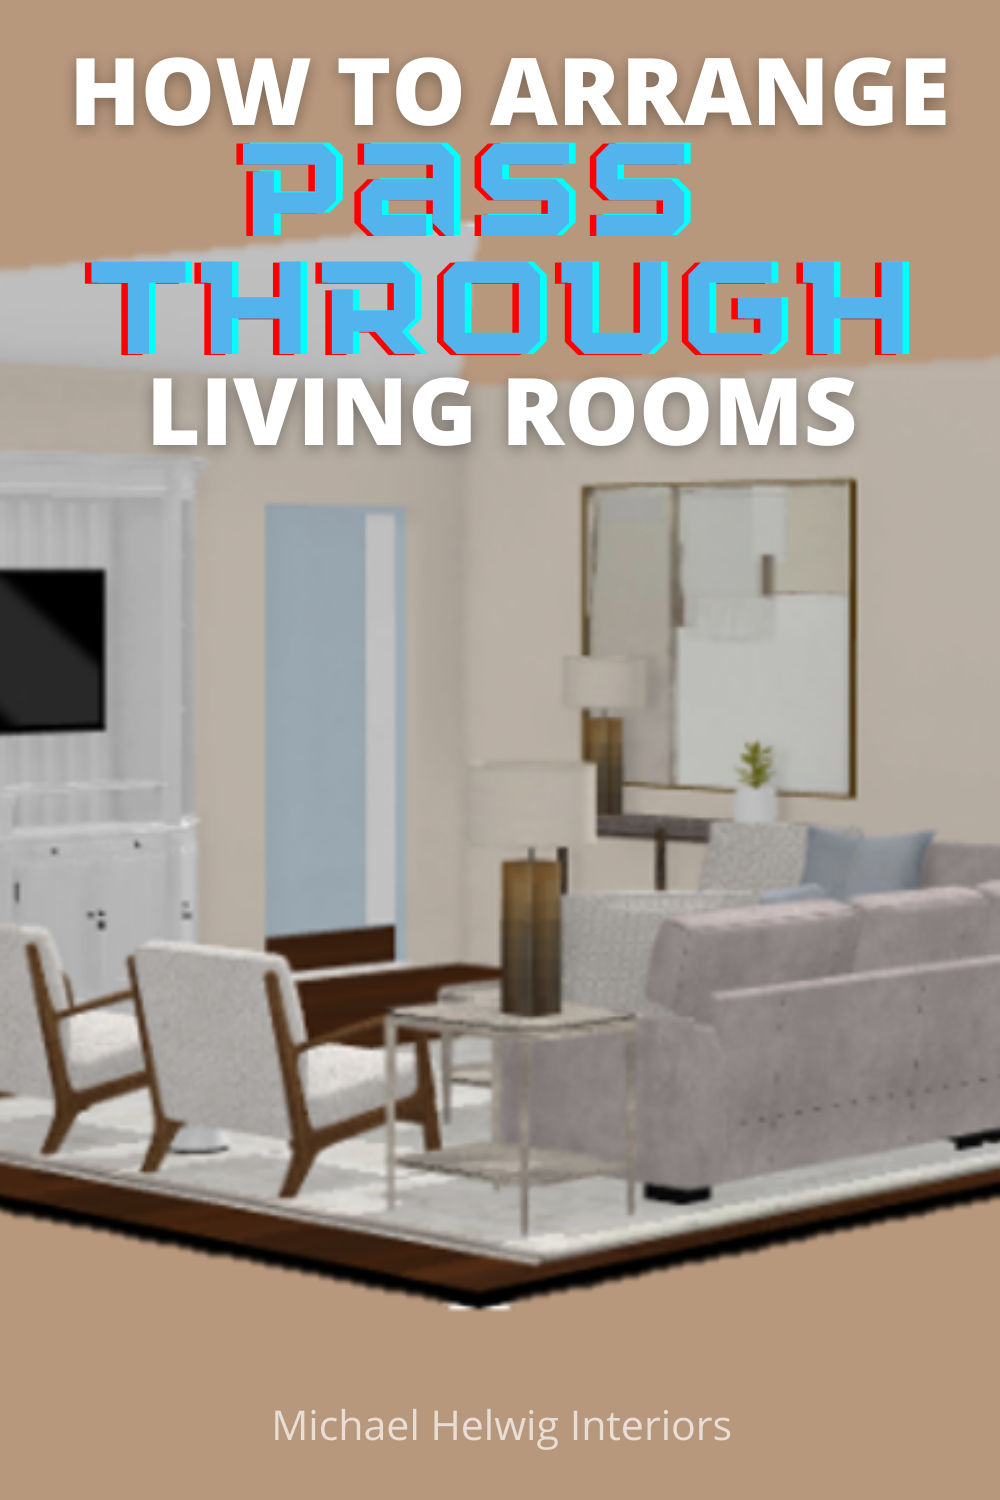 Living Room With 3 Or More Doors